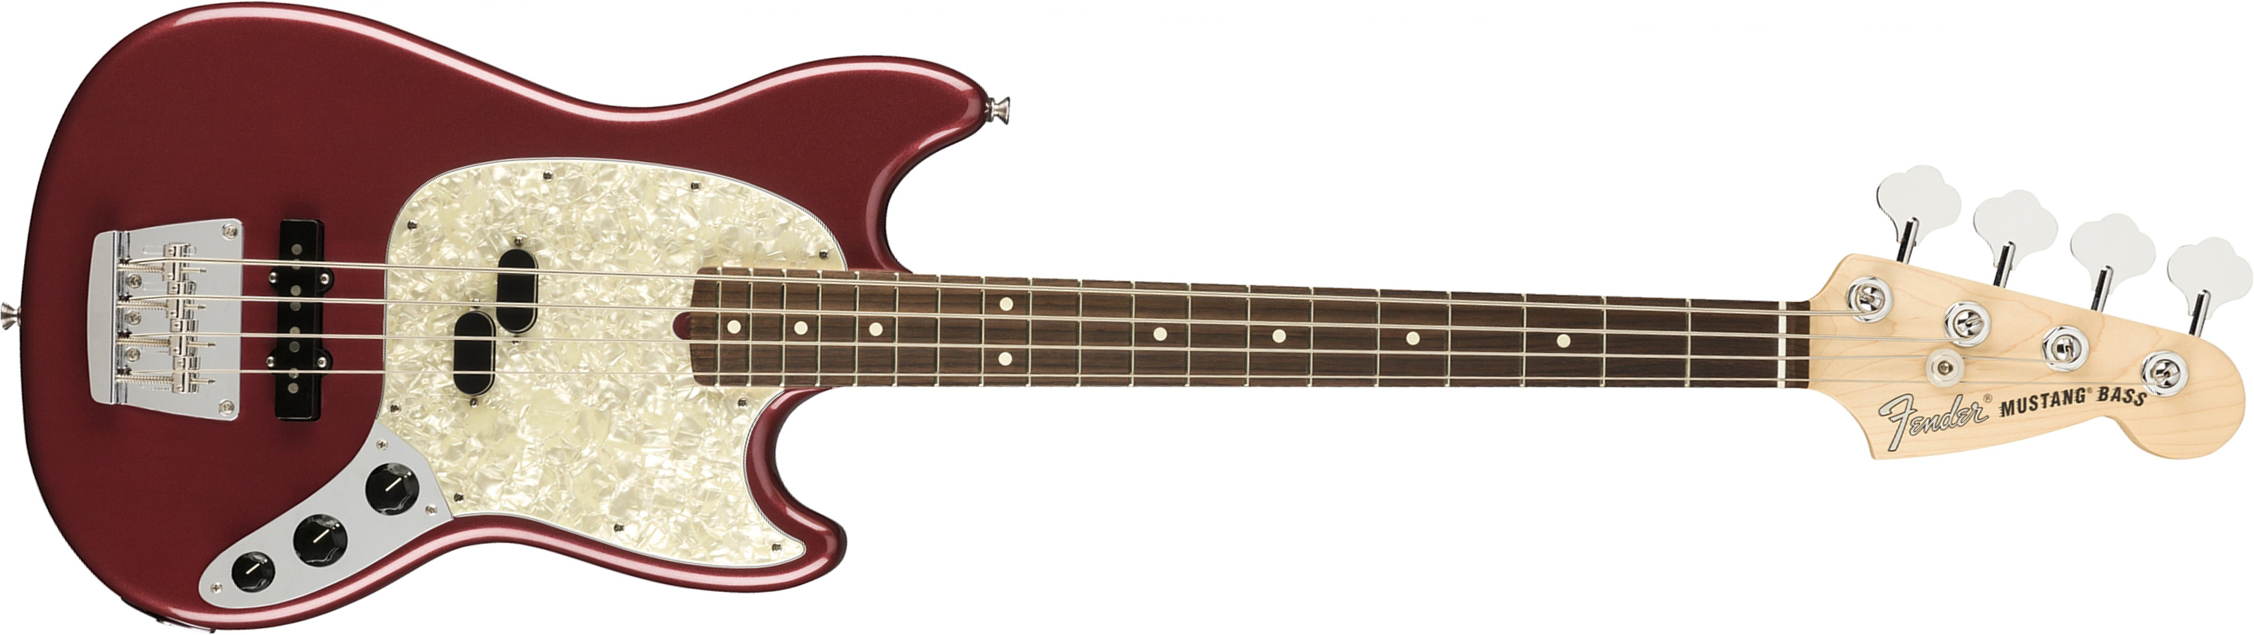 Fender Mustang Bass American Performer Usa Rw - Aubergine - Electric bass for kids - Main picture